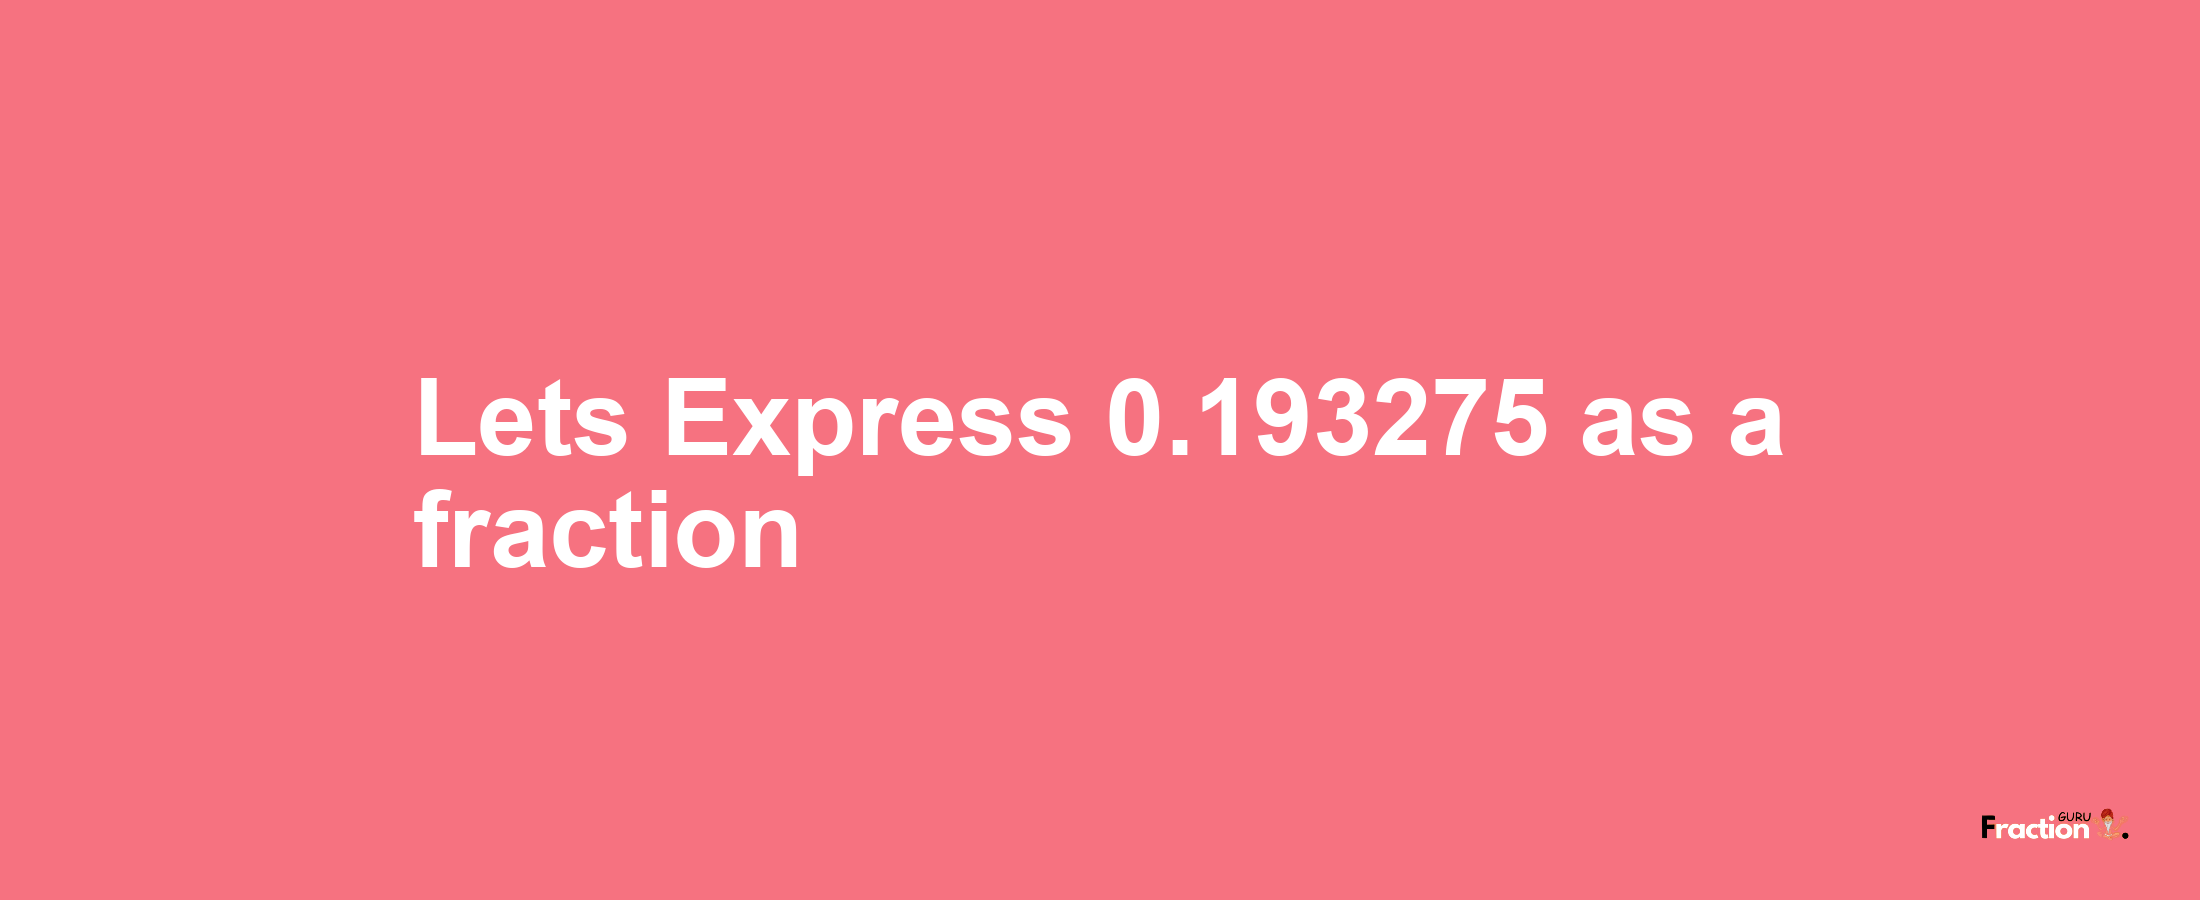 Lets Express 0.193275 as afraction